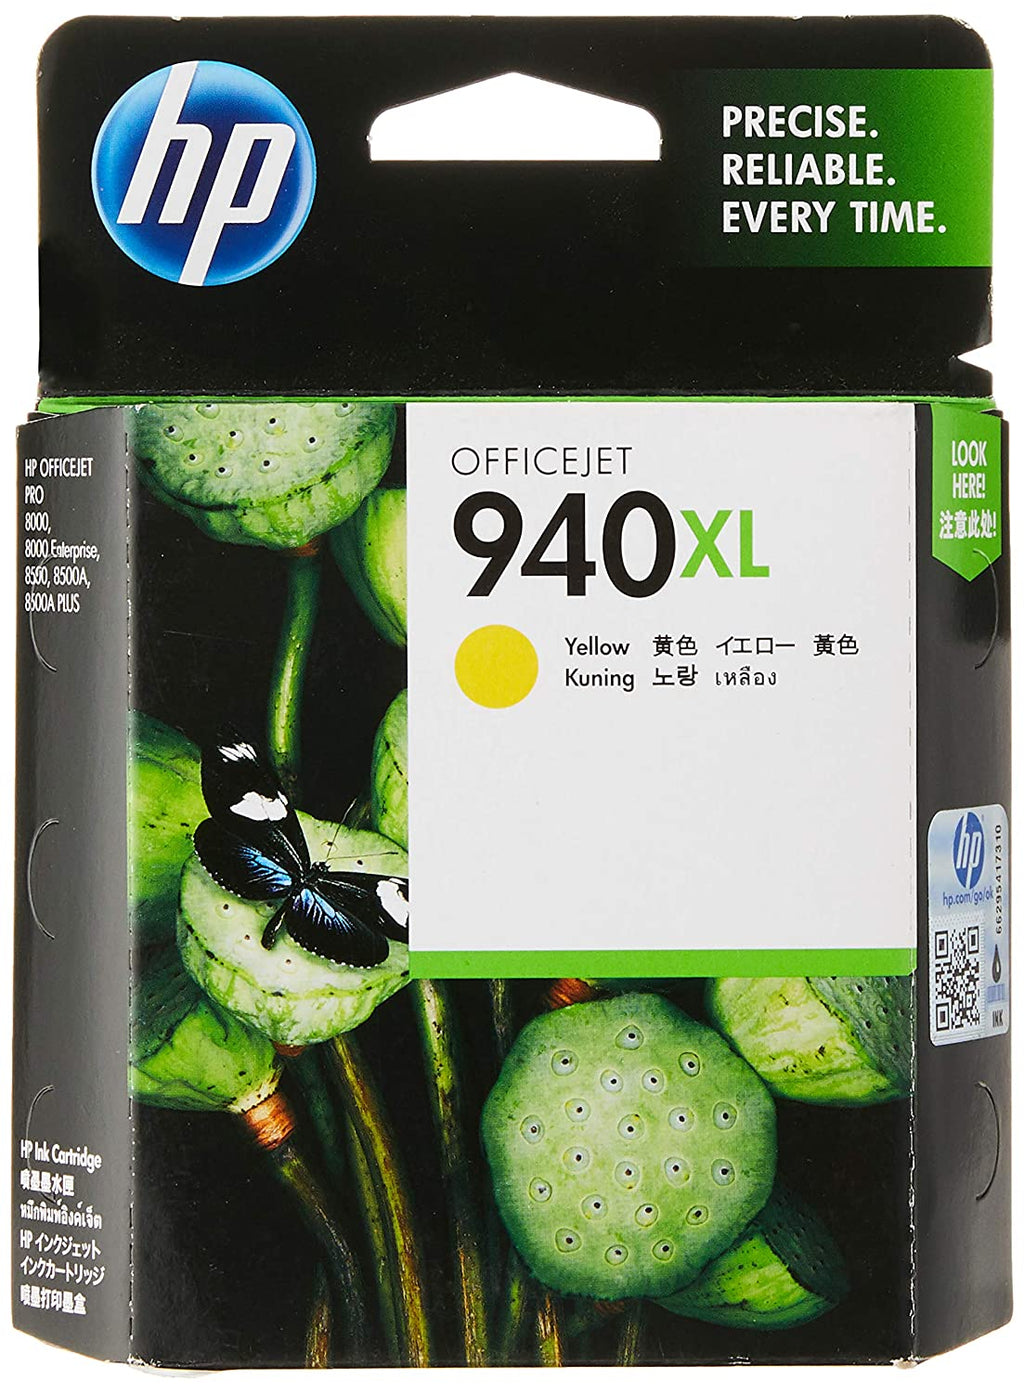 HP 940XL Yellow Officejet Ink Cartridge Pack of 2